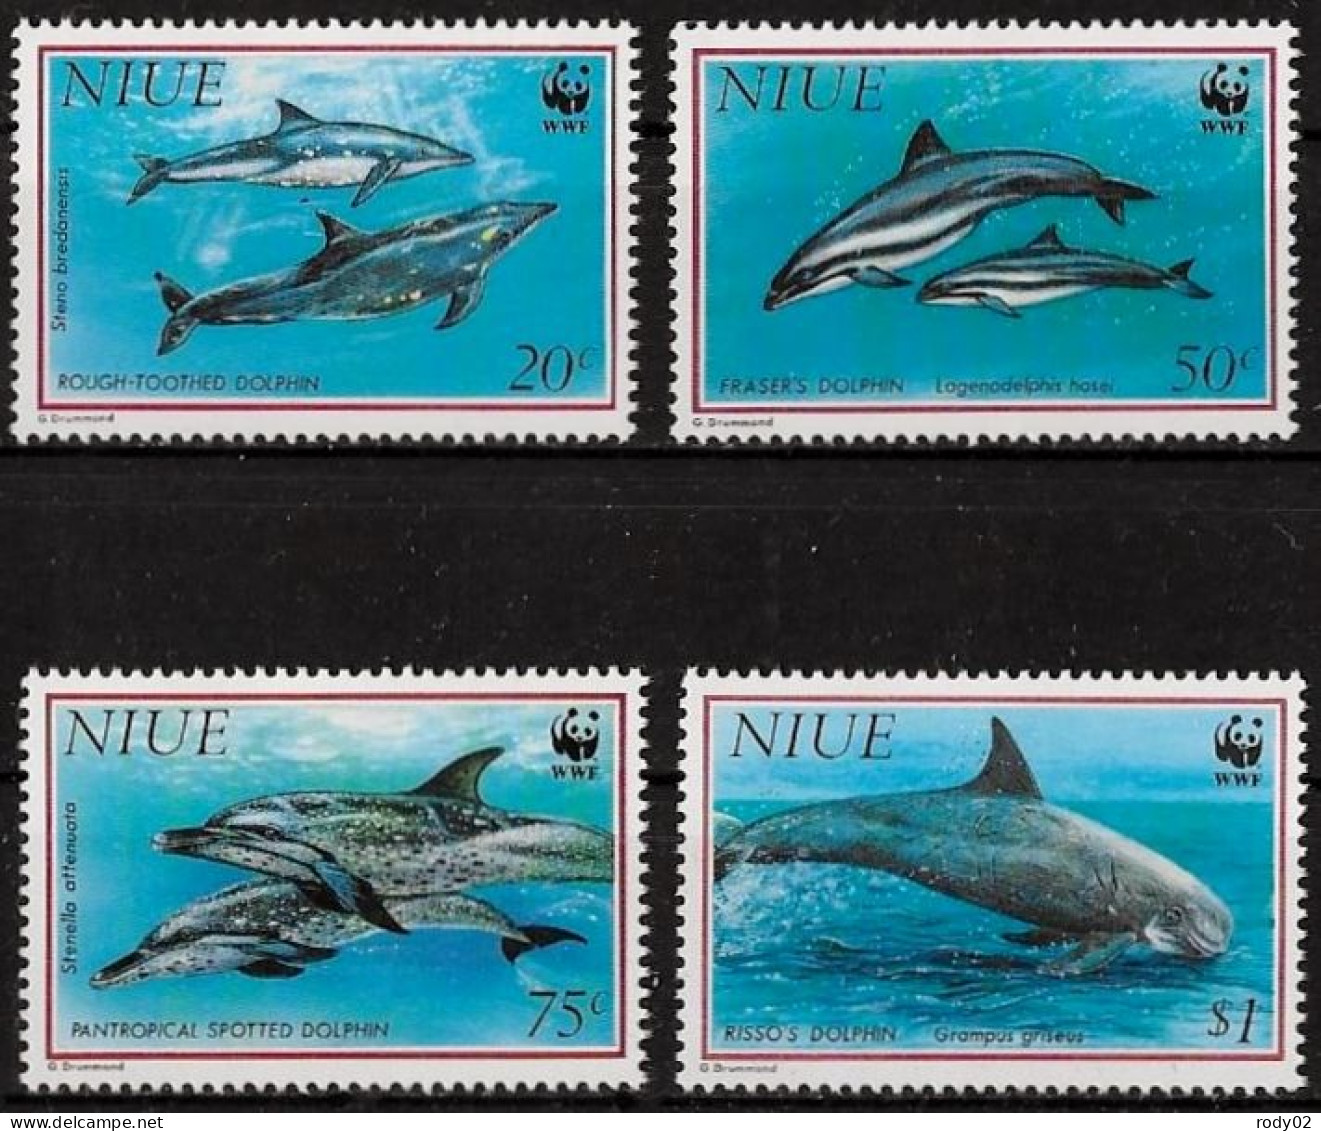 NIUE - DAUPHINS - WWF - N° 614 A 617 - NEUF** MNH - Dolphins